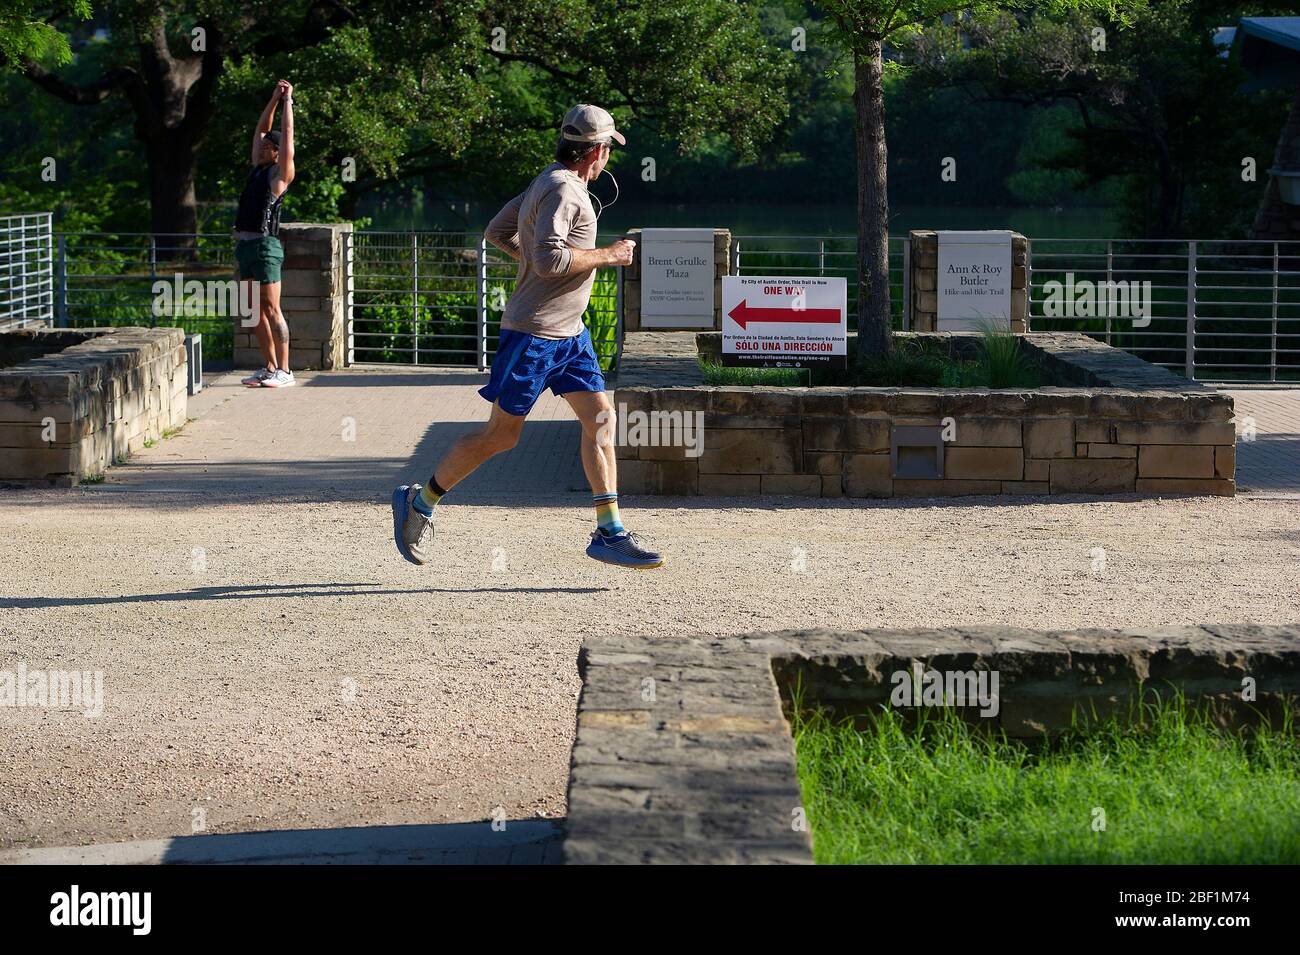 Mitigate Potential Gatherings. 16th Apr, 2020. The City of Austin Parks Department placed signs at the Ann and Roy Butler Hike and Bike Trail along Lady Bird Lake, into a one-way trail in an effort to mitigate potential gatherings. Austin, Texas. Mario Cantu/CSM/Alamy Live News Stock Photo